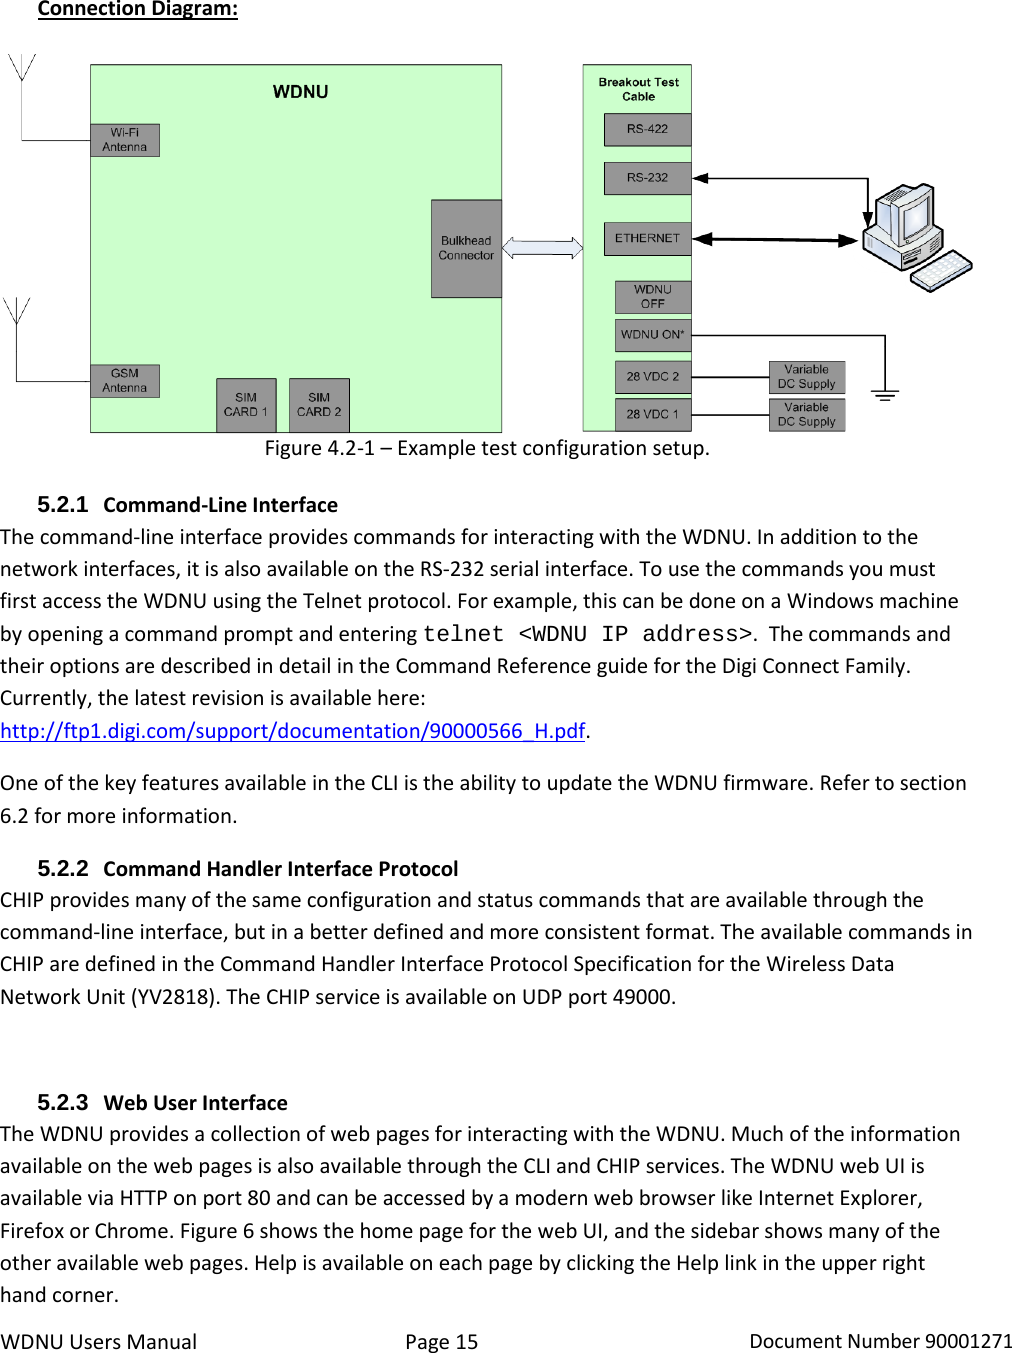 WDNU Users Manual Page 15 Document Number 90001271  Connection Diagram: Figure 4.2-1 – Example test configuration setup. 5.2.1 Command-Line Interface The command-line interface provides commands for interacting with the WDNU. In addition to the network interfaces, it is also available on the RS-232 serial interface. To use the commands you must first access the WDNU using the Telnet protocol. For example, this can be done on a Windows machine by opening a command prompt and entering telnet &lt;WDNU IP address&gt;.  The commands and their options are described in detail in the Command Reference guide for the Digi Connect Family. Currently, the latest revision is available here: http://ftp1.digi.com/support/documentation/90000566_H.pdf.  One of the key features available in the CLI is the ability to update the WDNU firmware. Refer to section 6.2 for more information. 5.2.2 Command Handler Interface Protocol CHIP provides many of the same configuration and status commands that are available through the command-line interface, but in a better defined and more consistent format. The available commands in CHIP are defined in the Command Handler Interface Protocol Specification for the Wireless Data Network Unit (YV2818). The CHIP service is available on UDP port 49000.  5.2.3 Web User Interface The WDNU provides a collection of web pages for interacting with the WDNU. Much of the information available on the web pages is also available through the CLI and CHIP services. The WDNU web UI is available via HTTP on port 80 and can be accessed by a modern web browser like Internet Explorer, Firefox or Chrome. Figure 6 shows the home page for the web UI, and the sidebar shows many of the other available web pages. Help is available on each page by clicking the Help link in the upper right hand corner. 